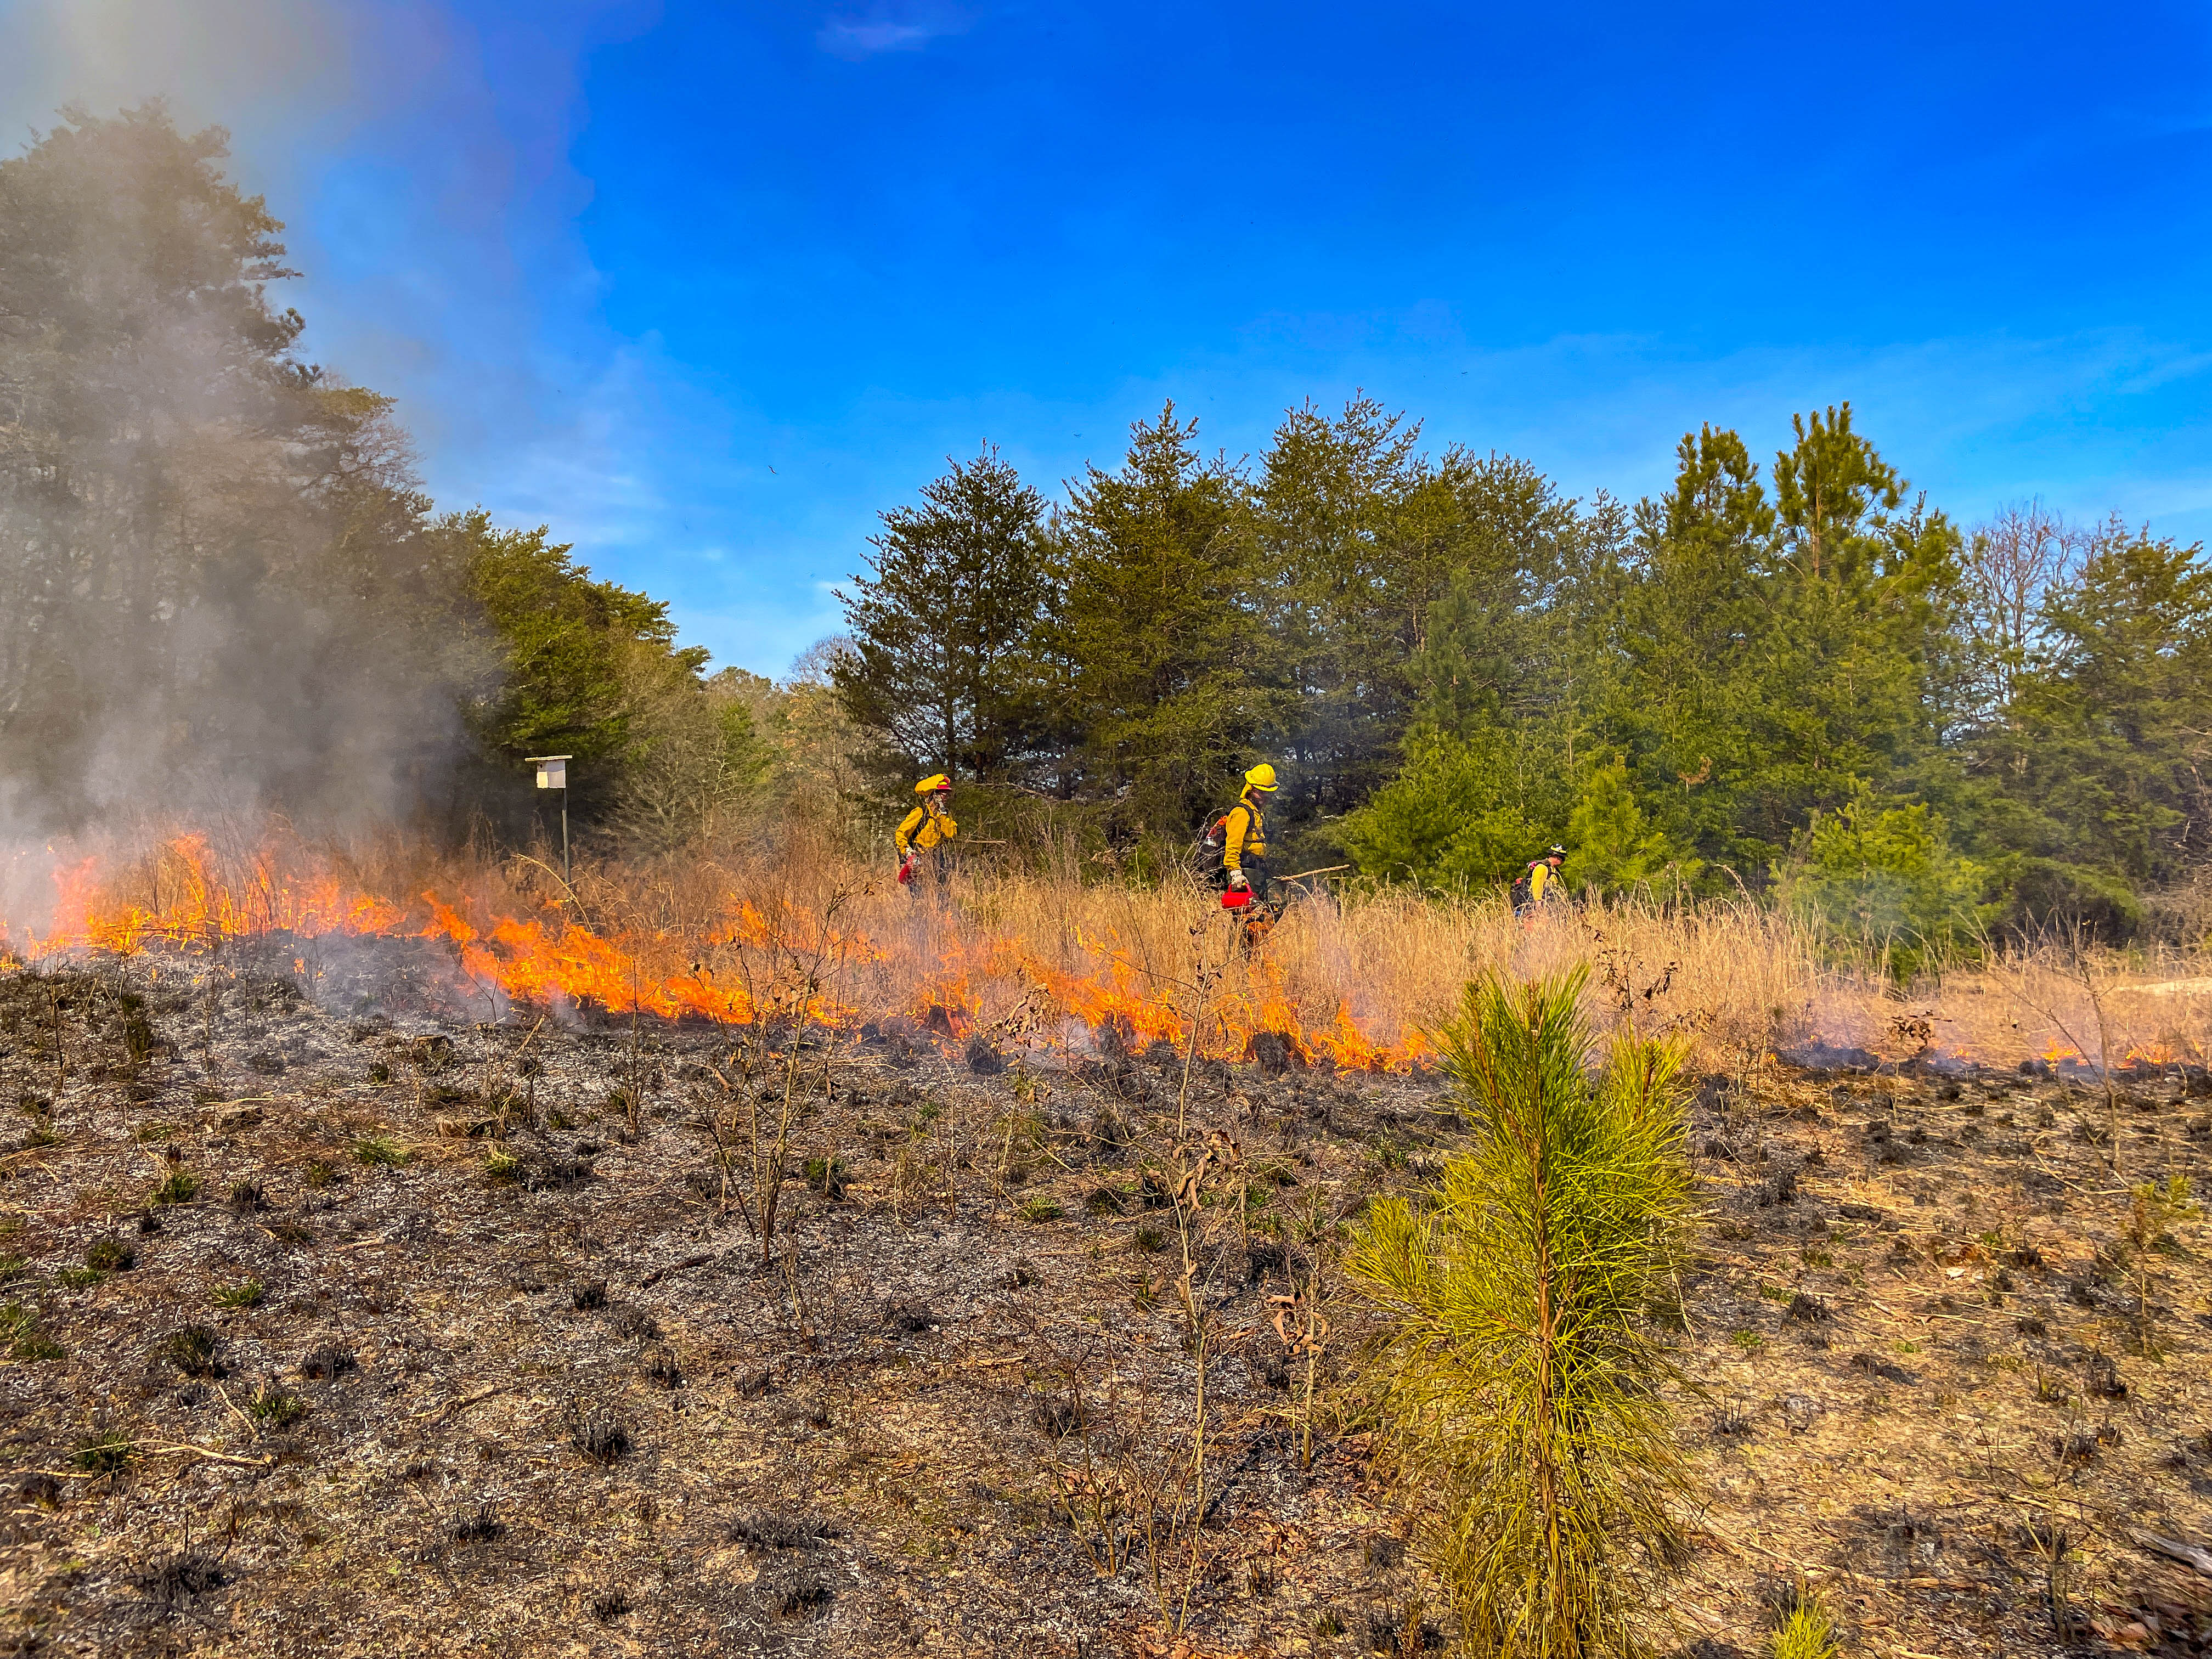 A small fire burns in a field in front of a tree line and 3 people dressed in yellow fire gear.